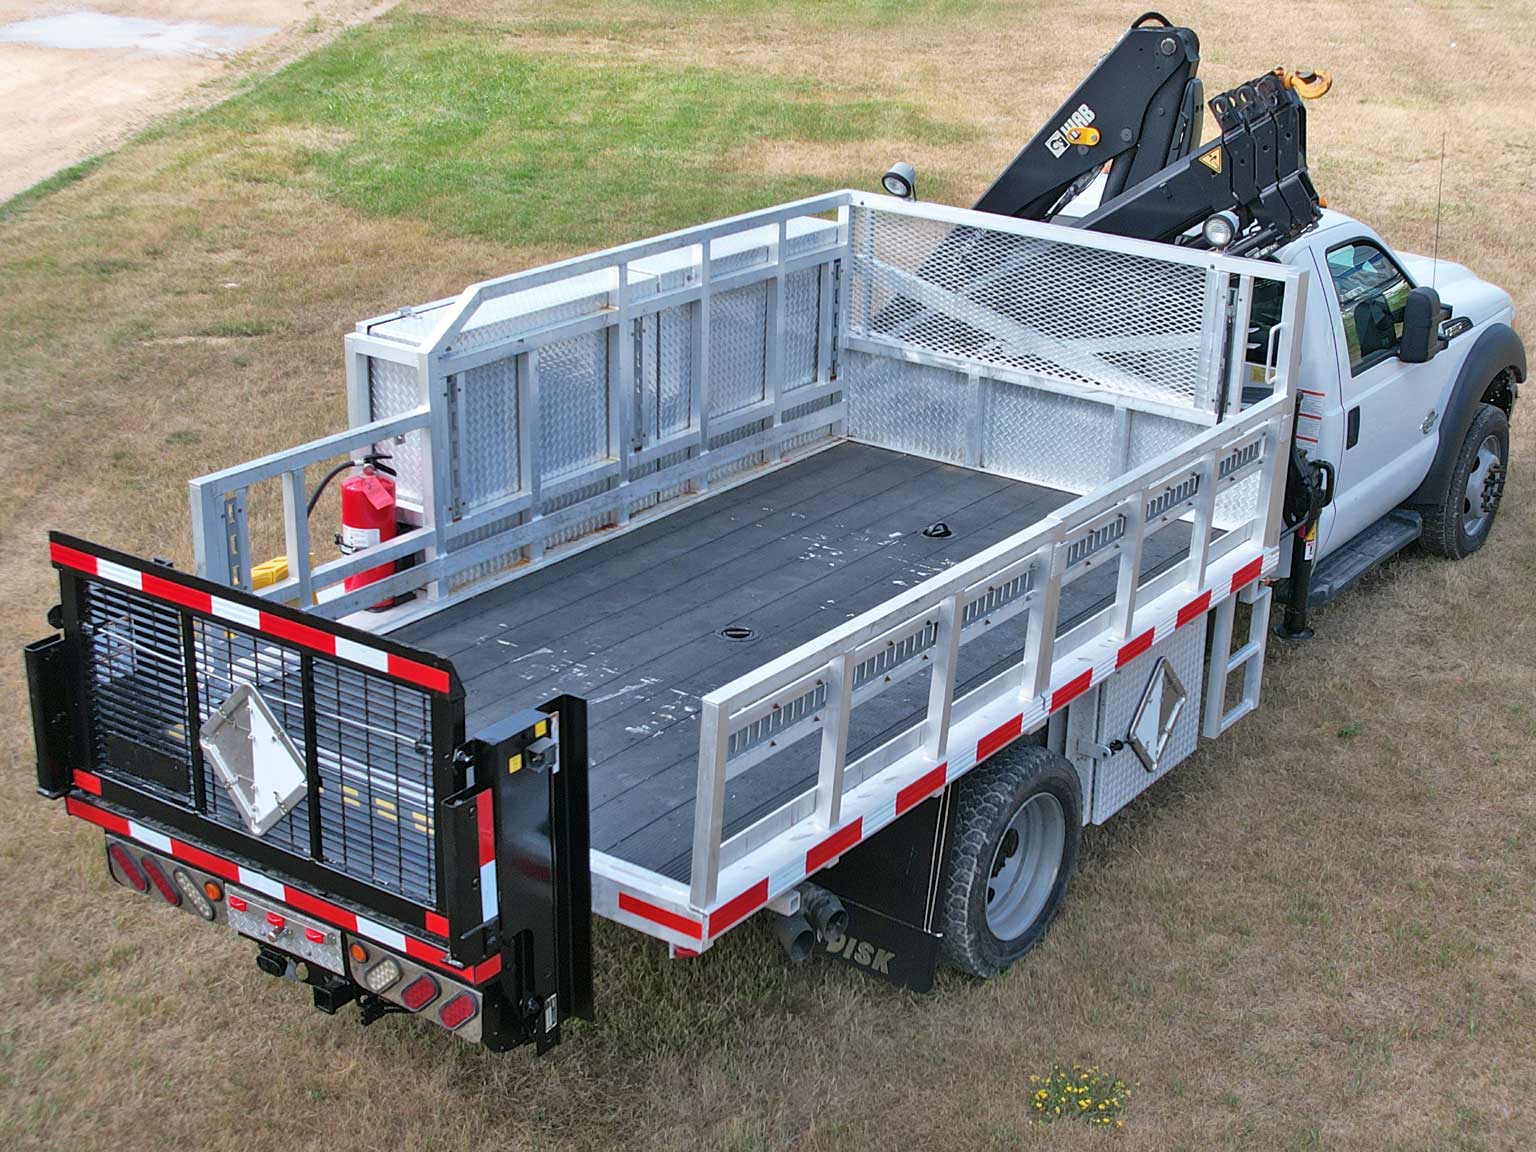 A silver and white Fisk truck with a crane on top of it